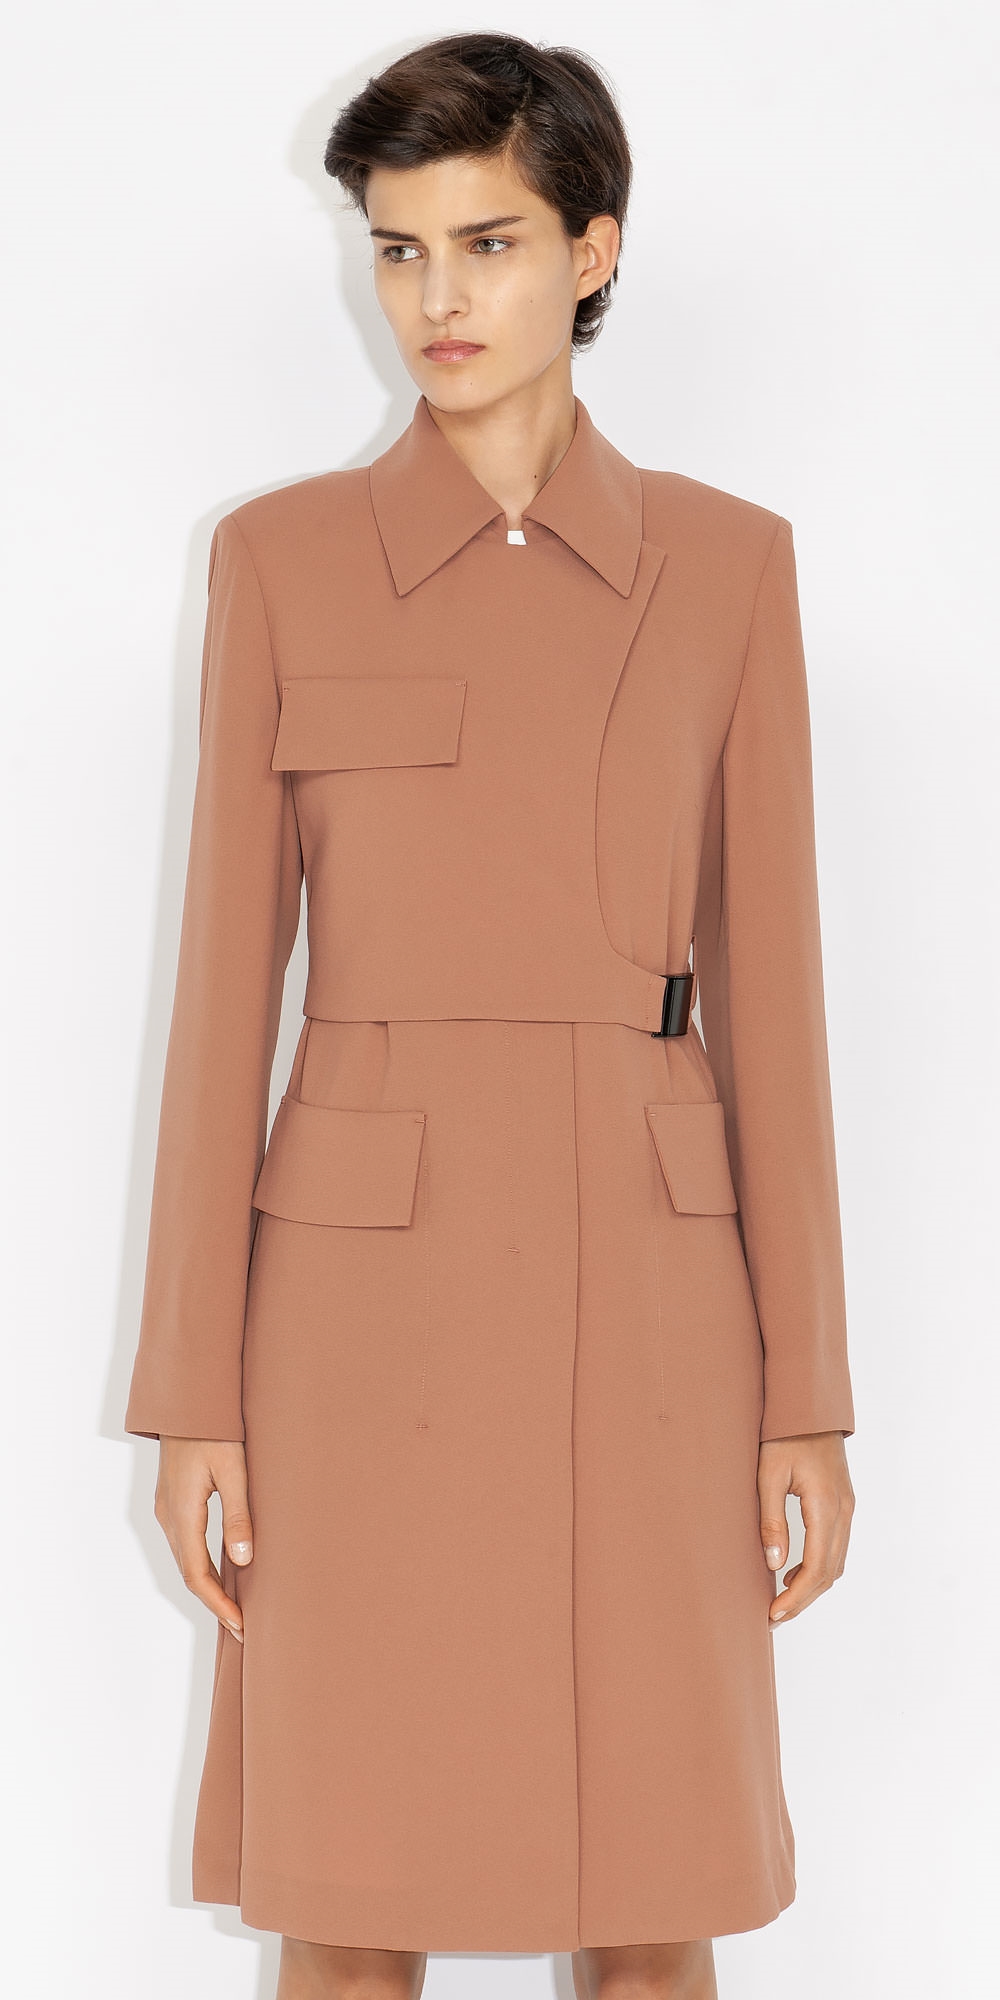 Clay Soft Layered Trench | Buy Coat Online - Cue